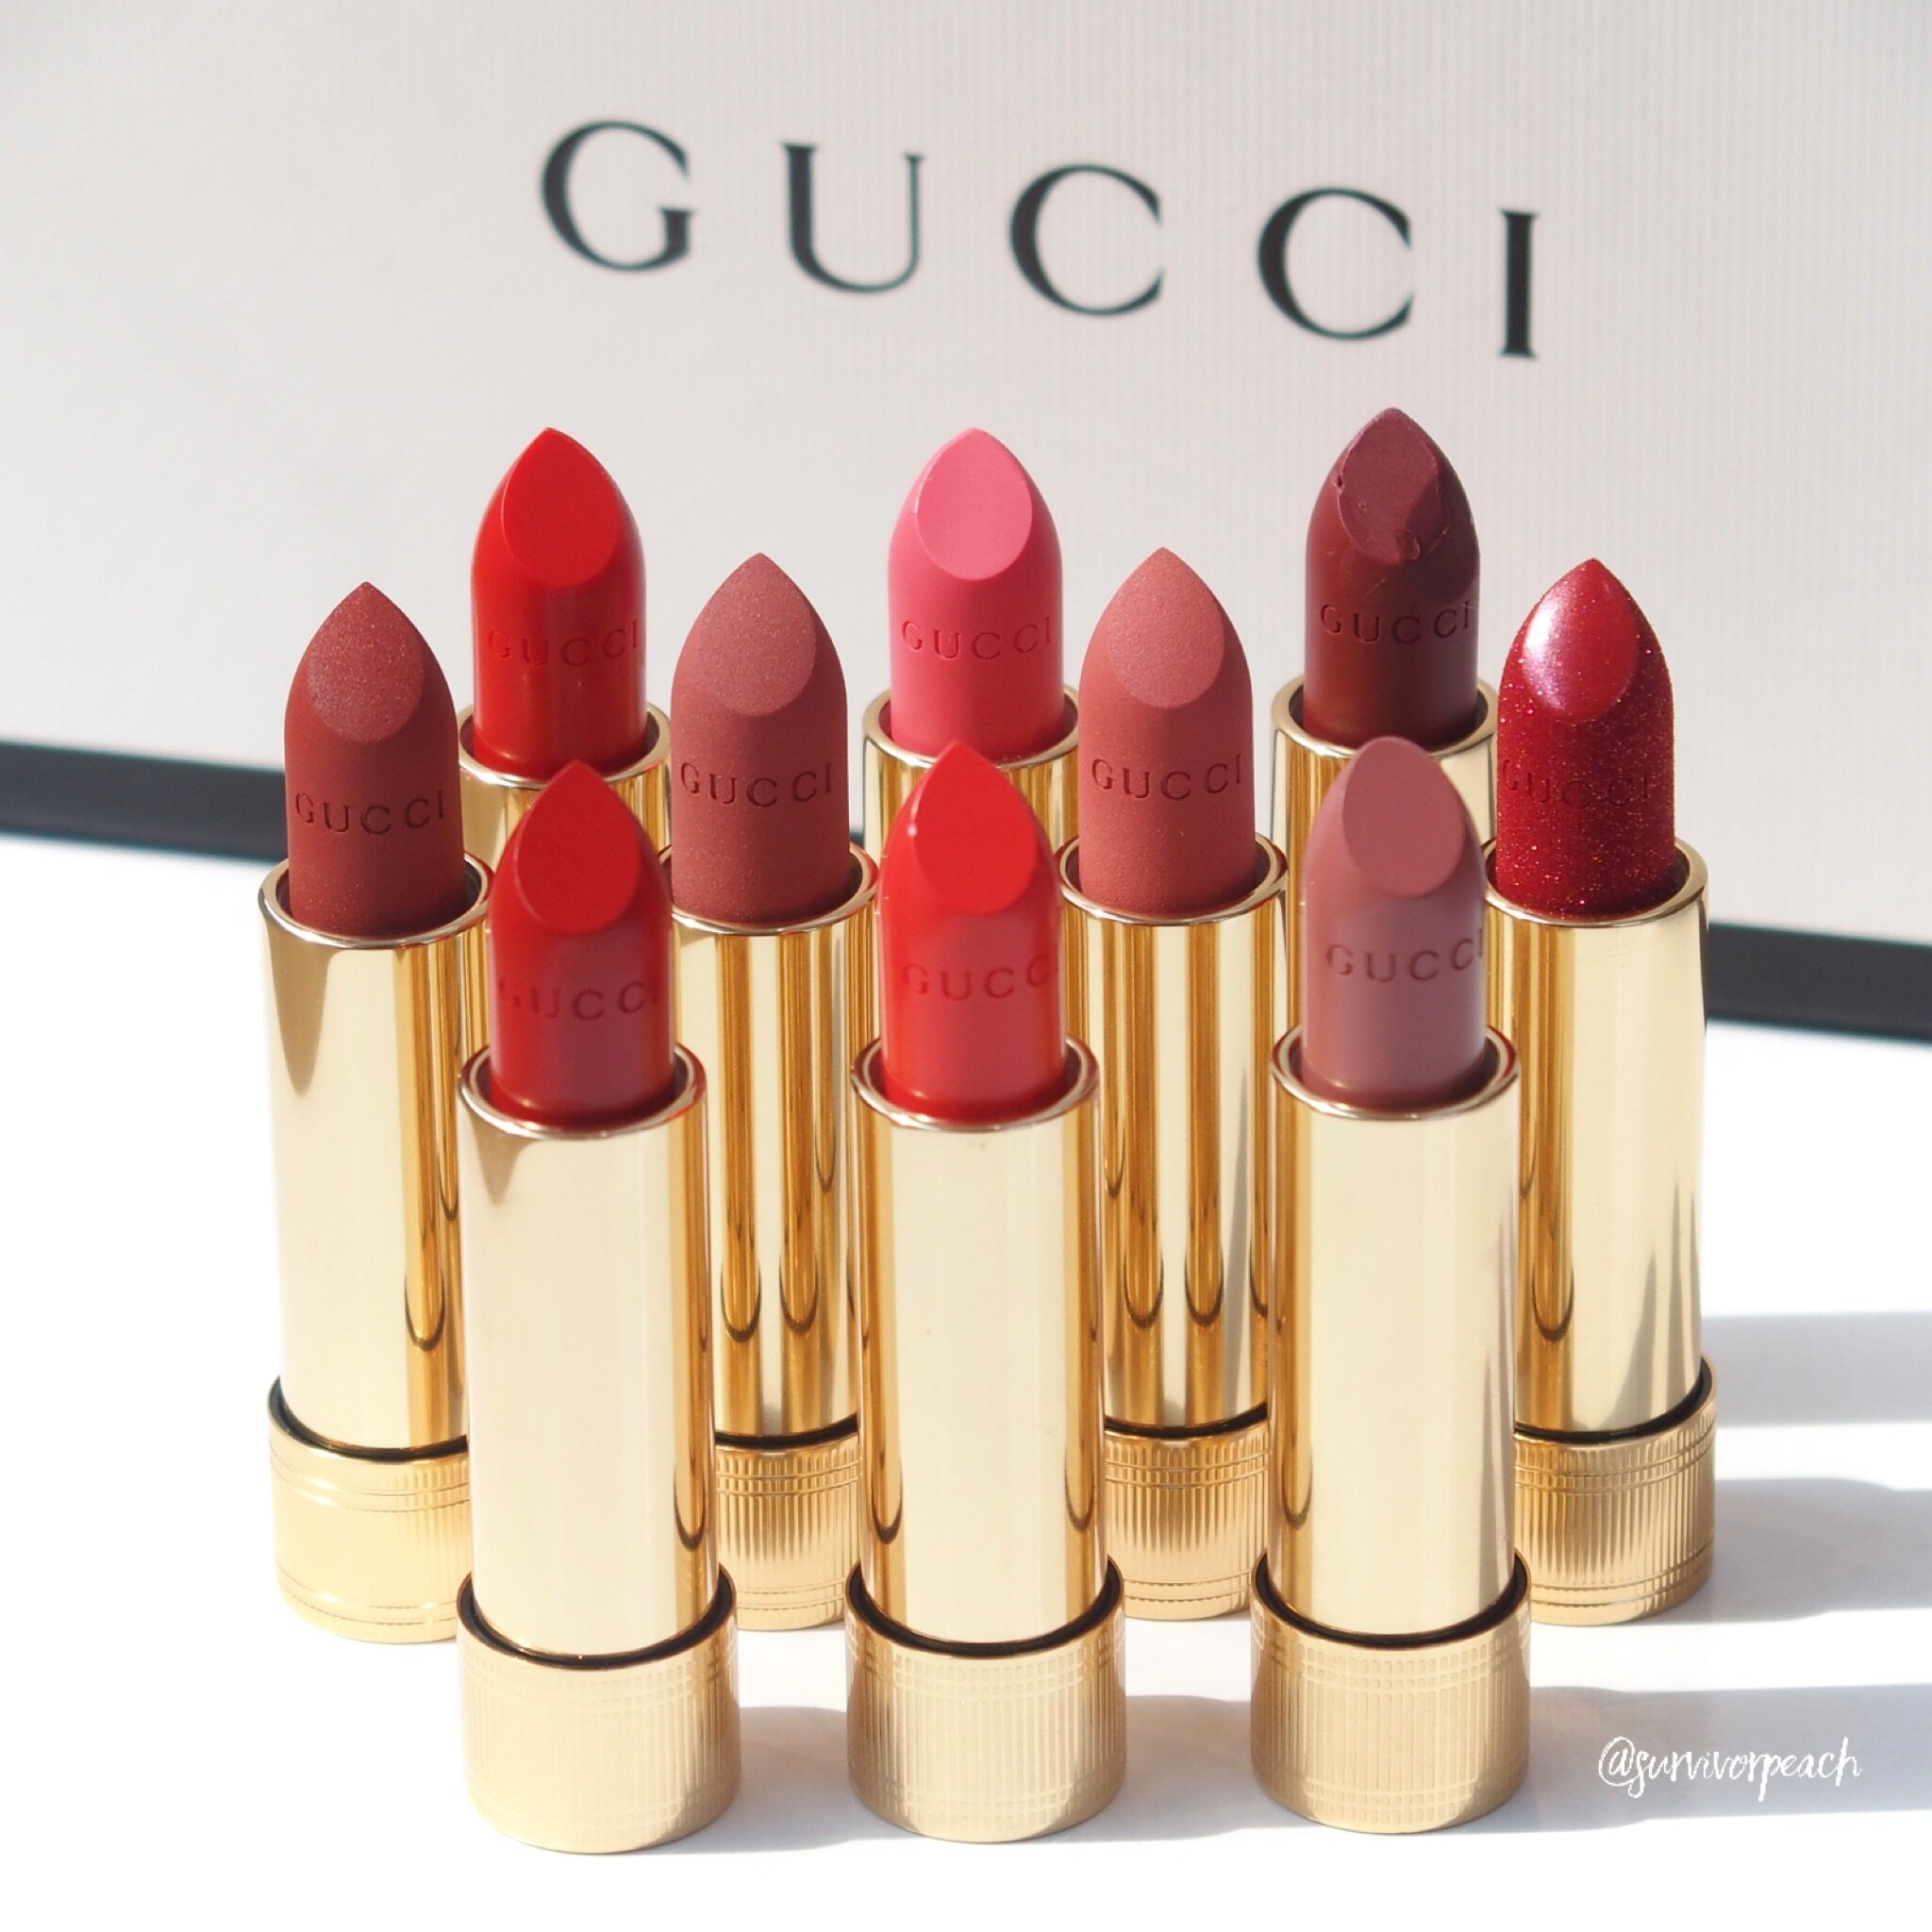 Gucci Beauty Lipstick Review \u0026 Swatches 